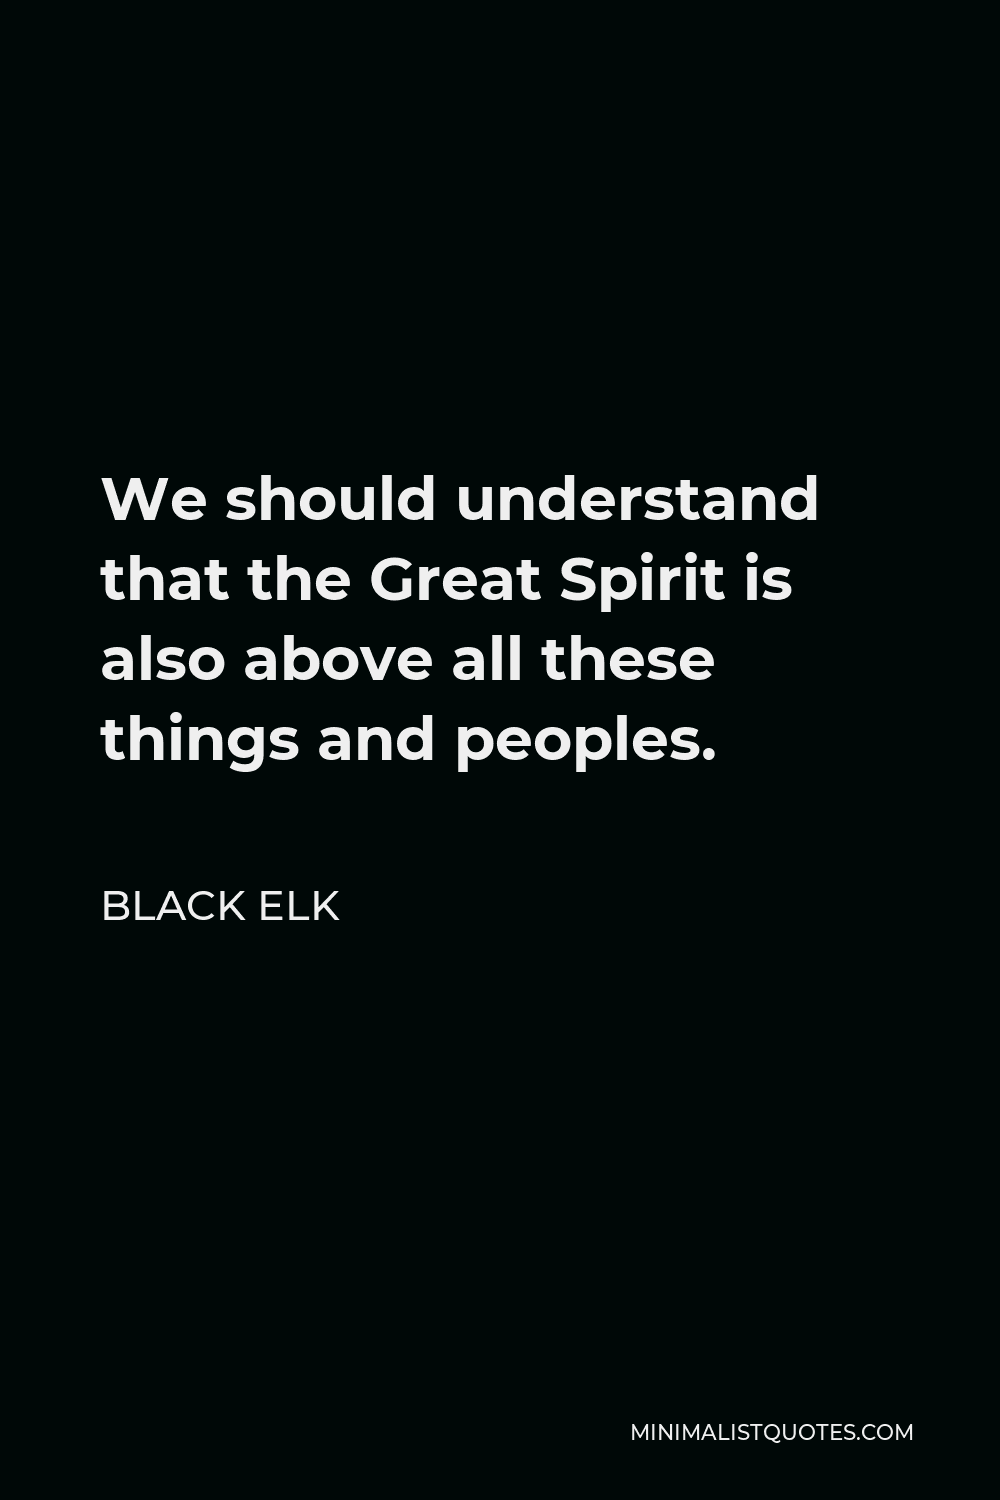 Black Elk Quote - We should understand that the Great Spirit is also above all these things and peoples.